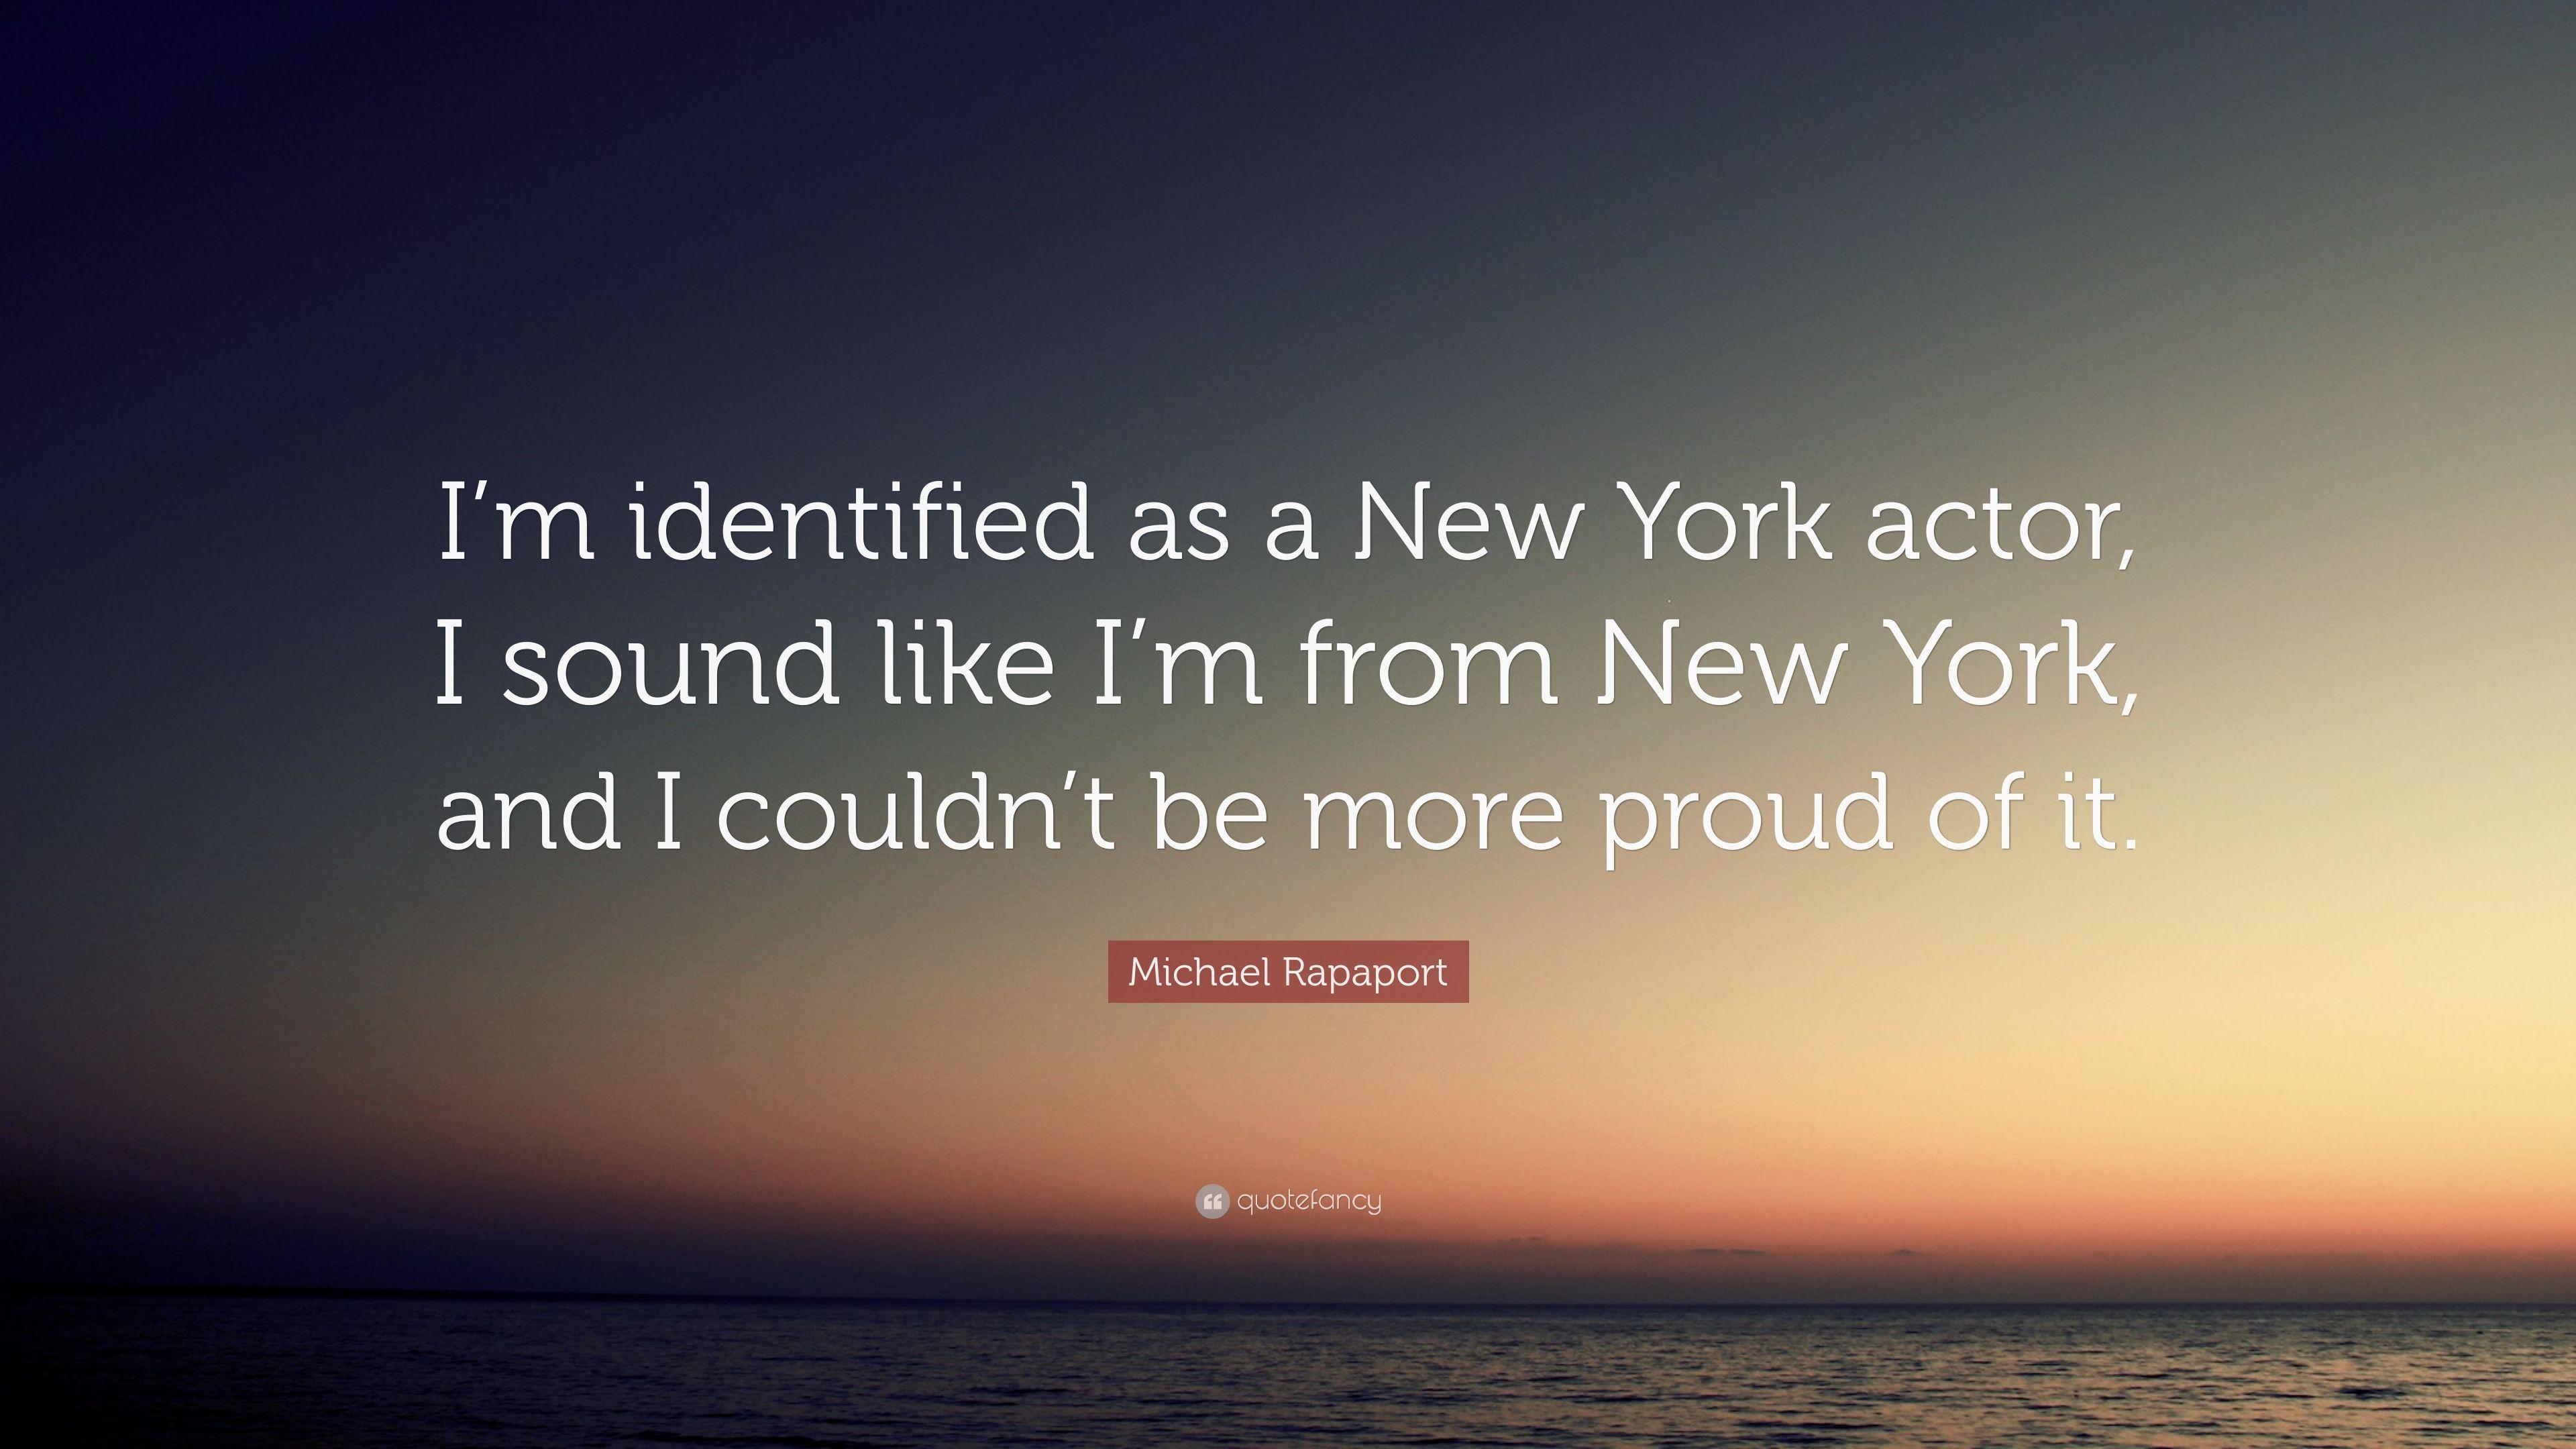 Michael Rapaport Quote: “I'm identified as a New York actor, I